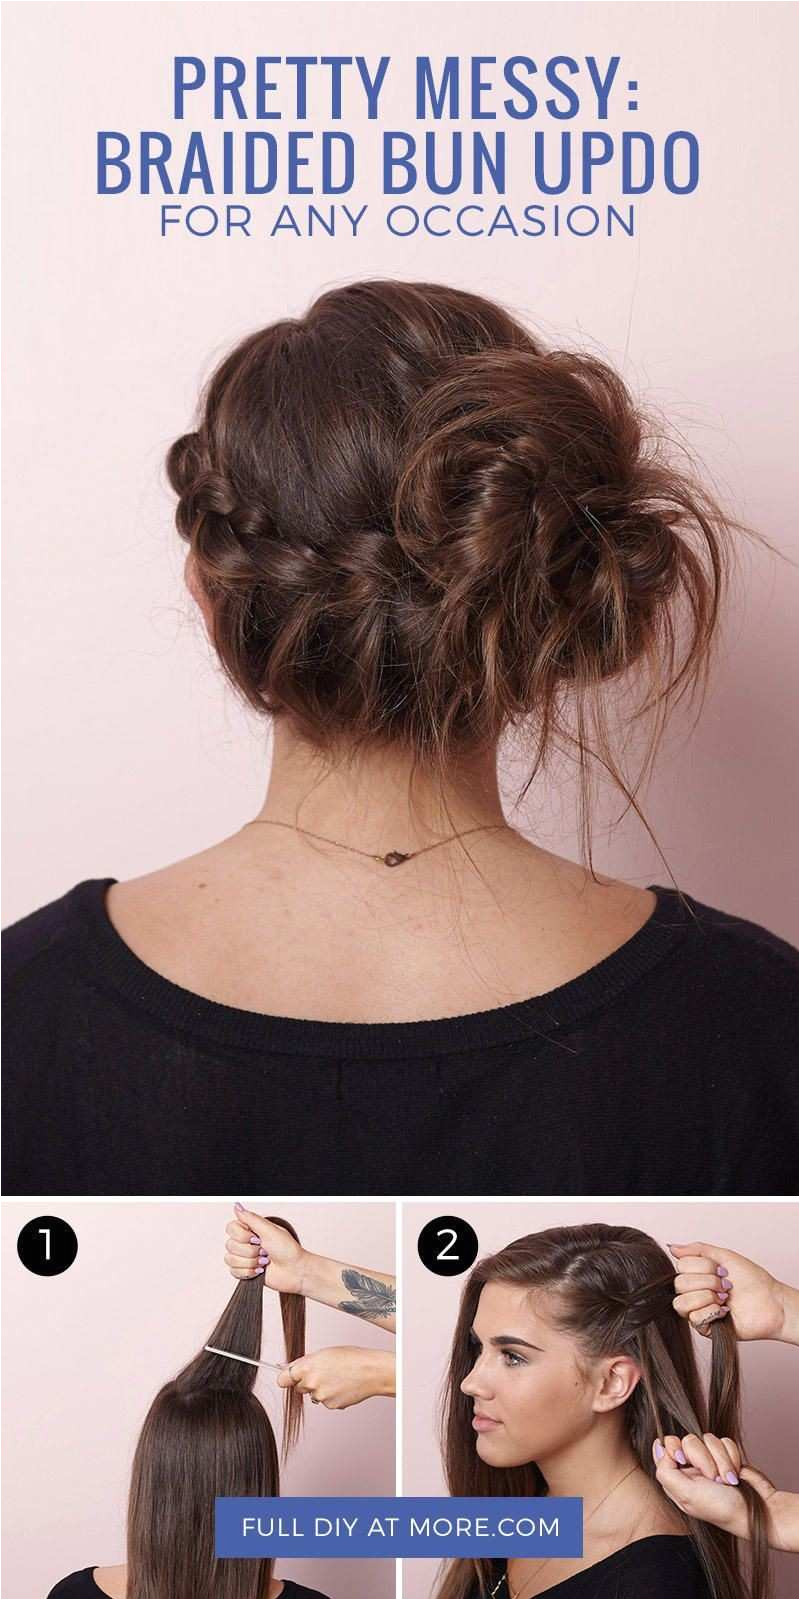 Girls Hairstyles for Parties Best Pretty Messy the Braided Bun Updo for Any Occasion